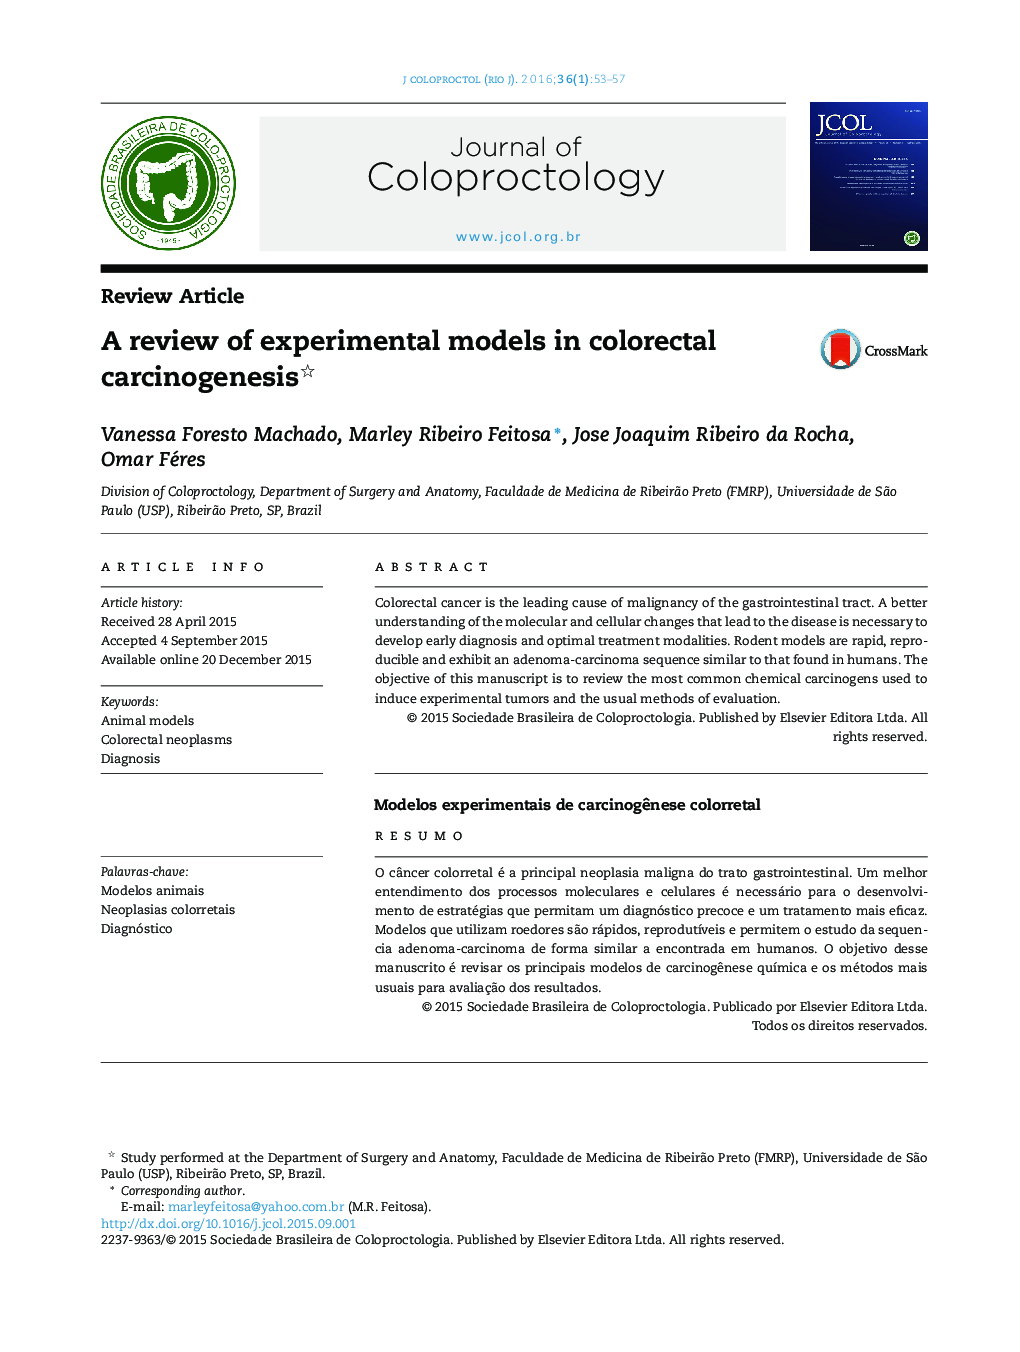 A review of experimental models in colorectal carcinogenesis 